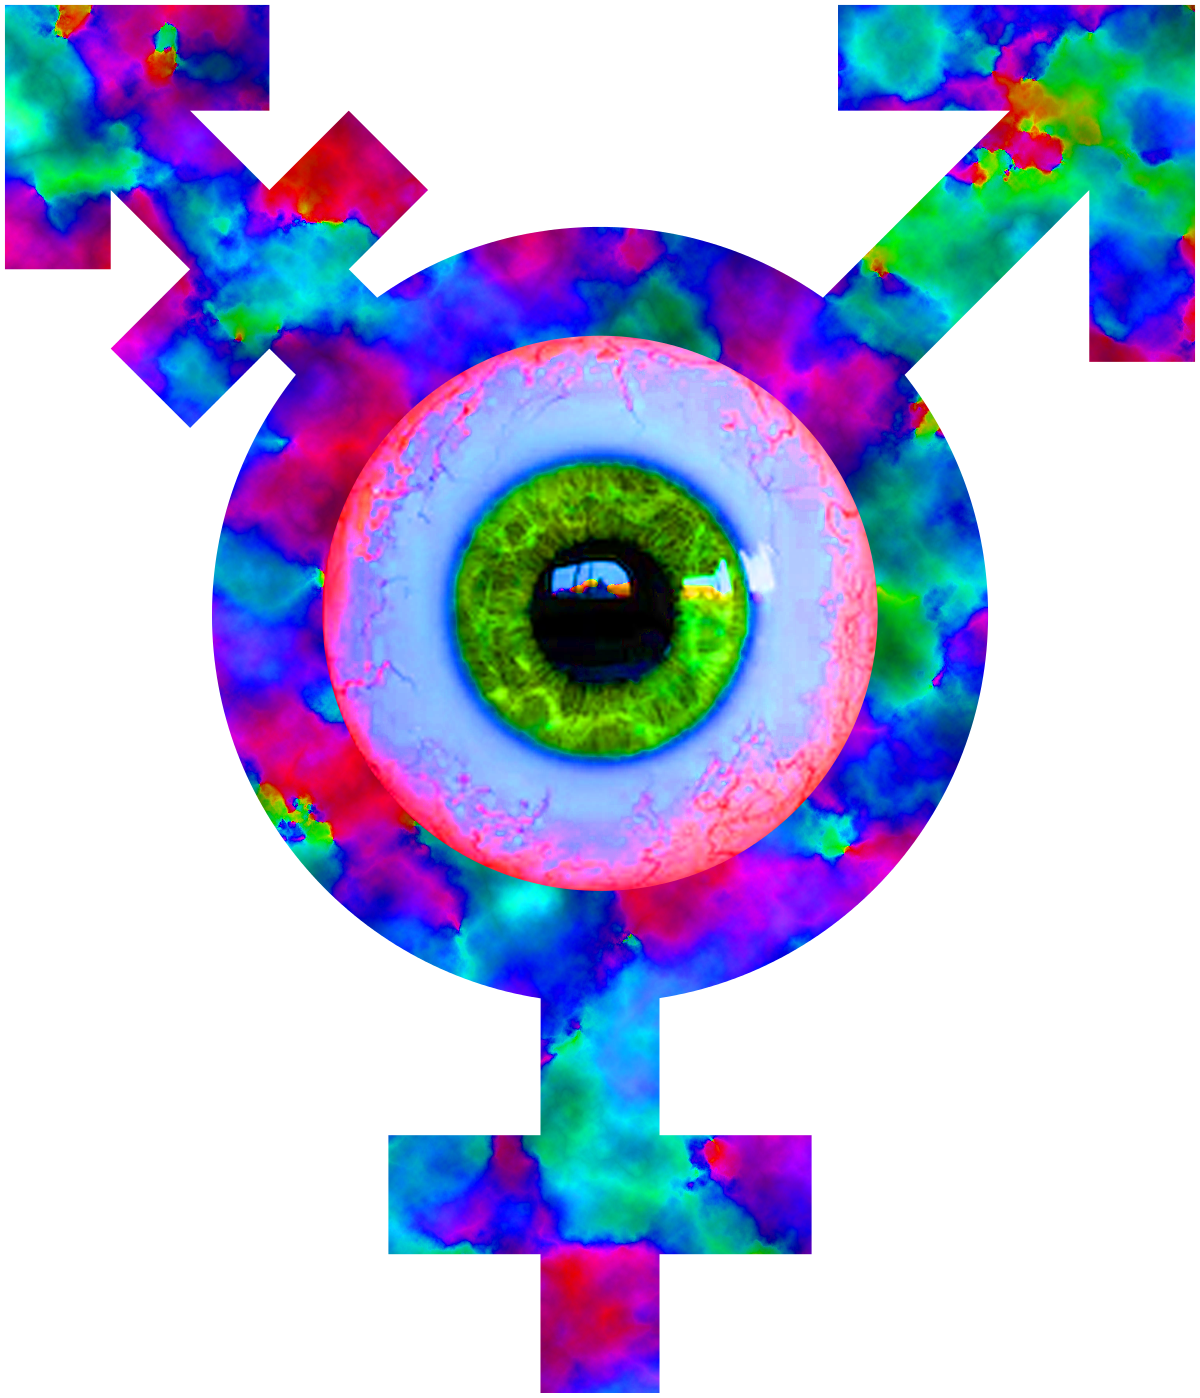 the xxxy logo, a transgender symbol with an eyeball in the middle